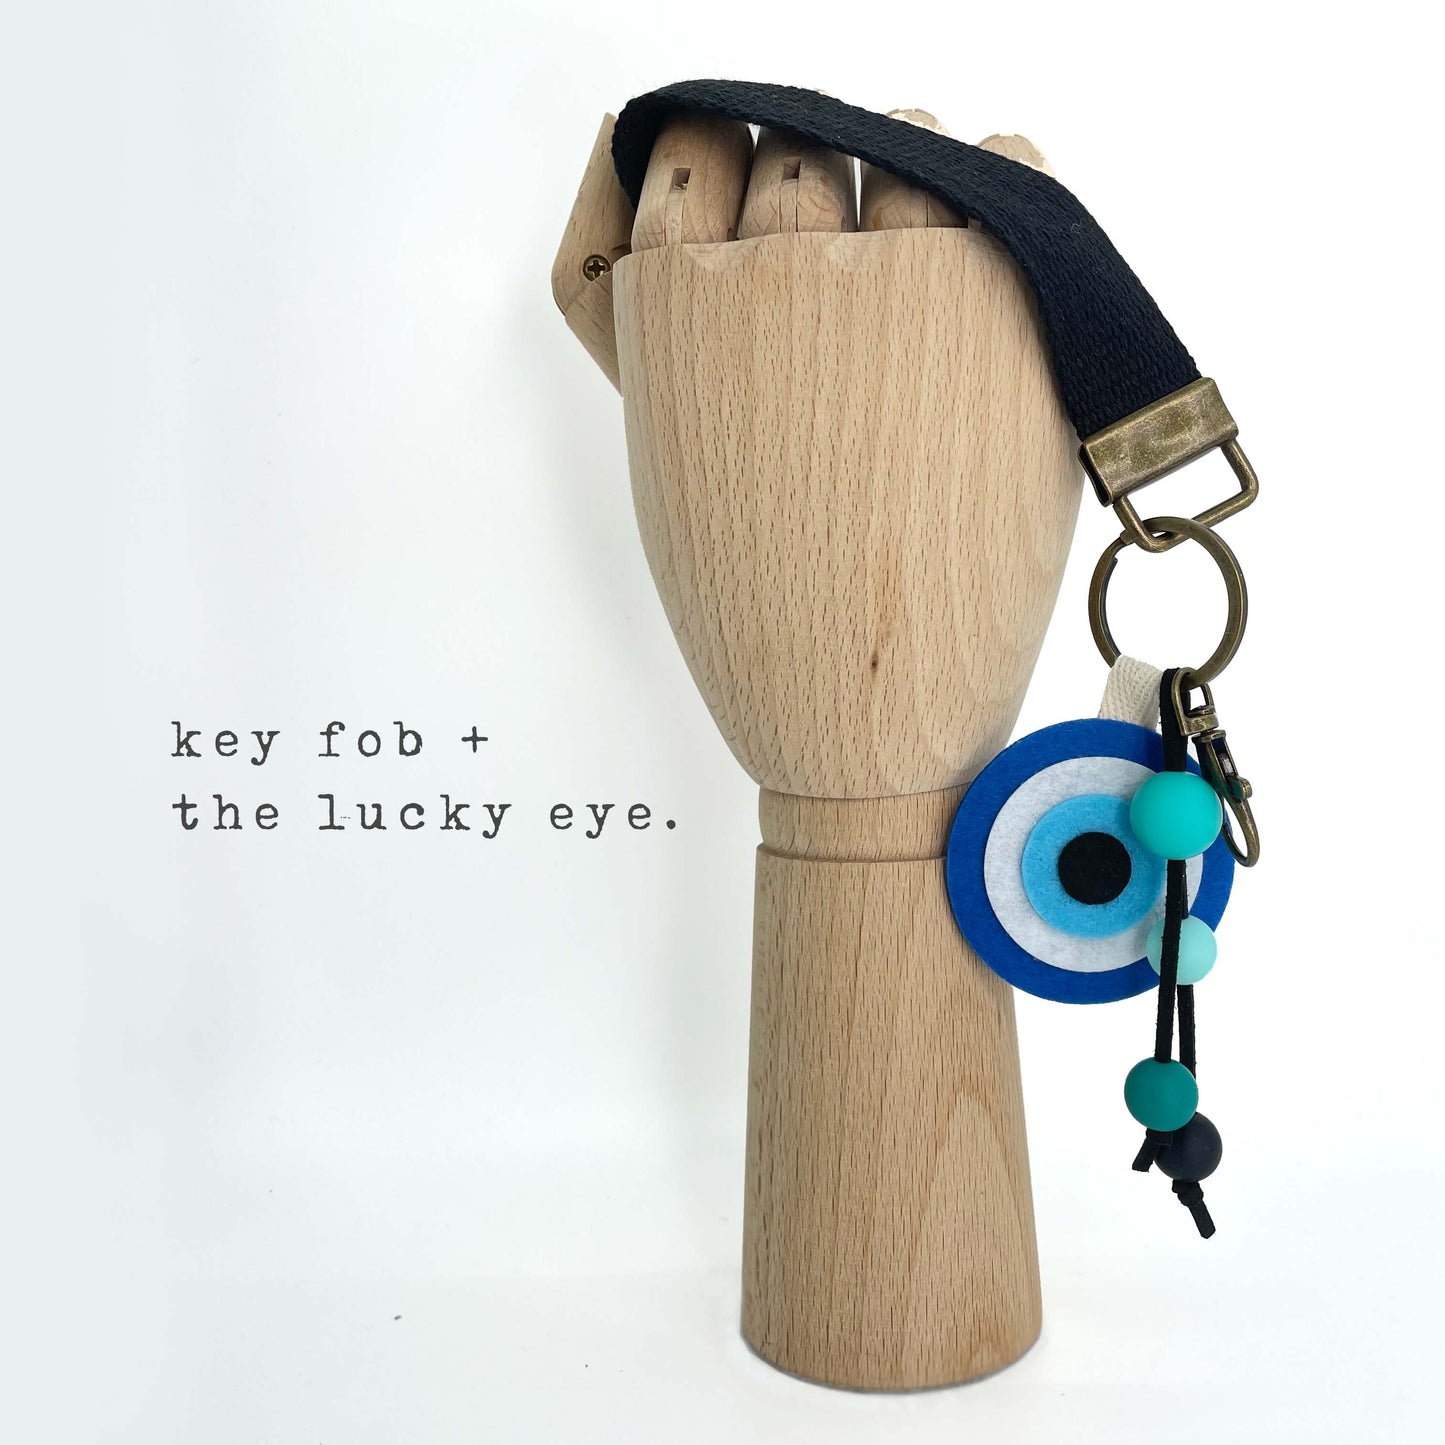 Be Positive.Keychain